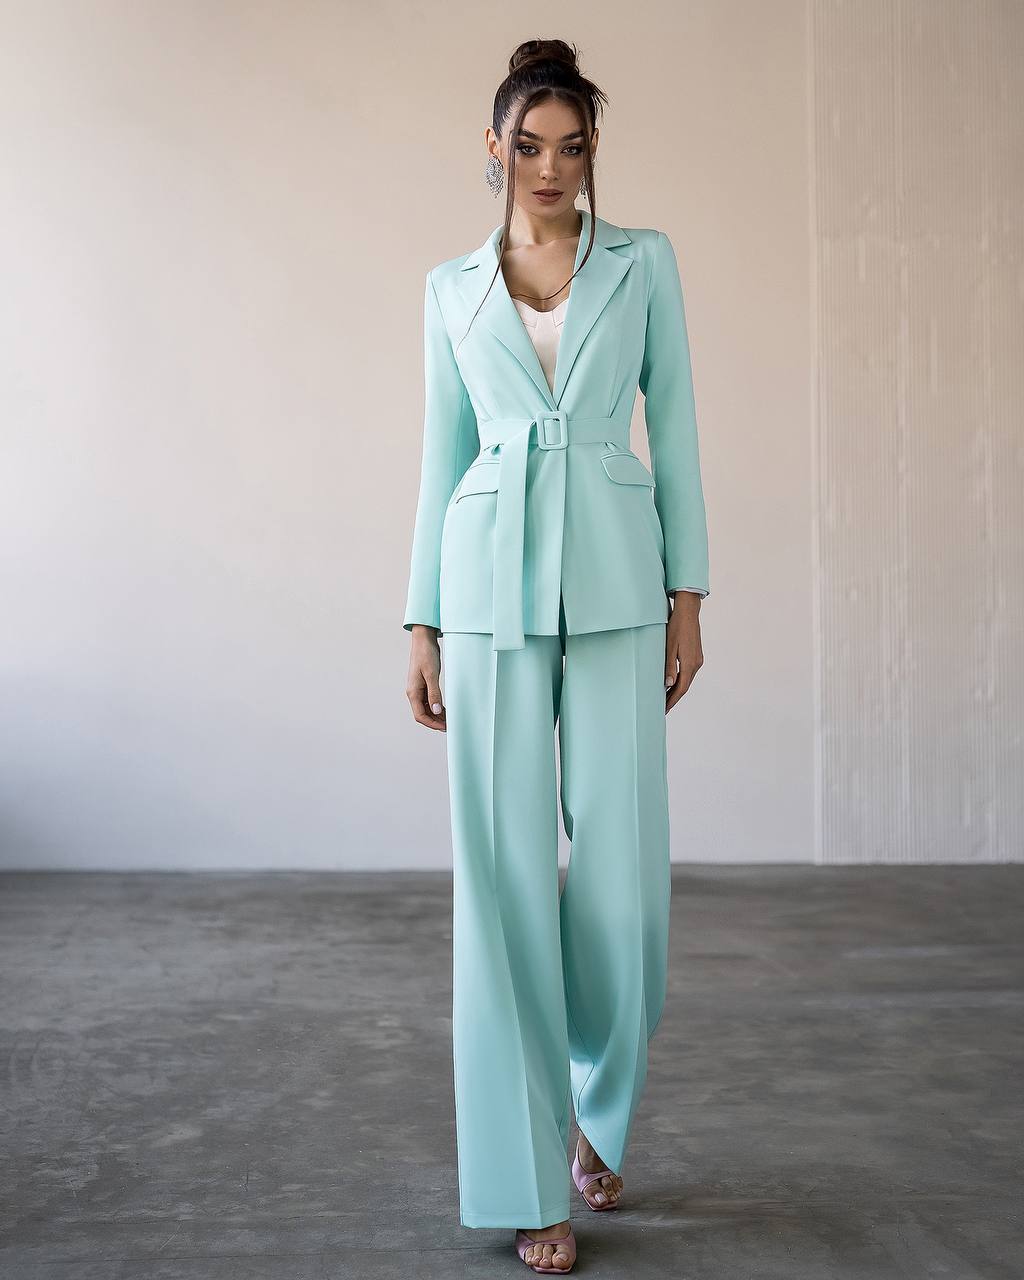 a woman in a light blue suit and sandals